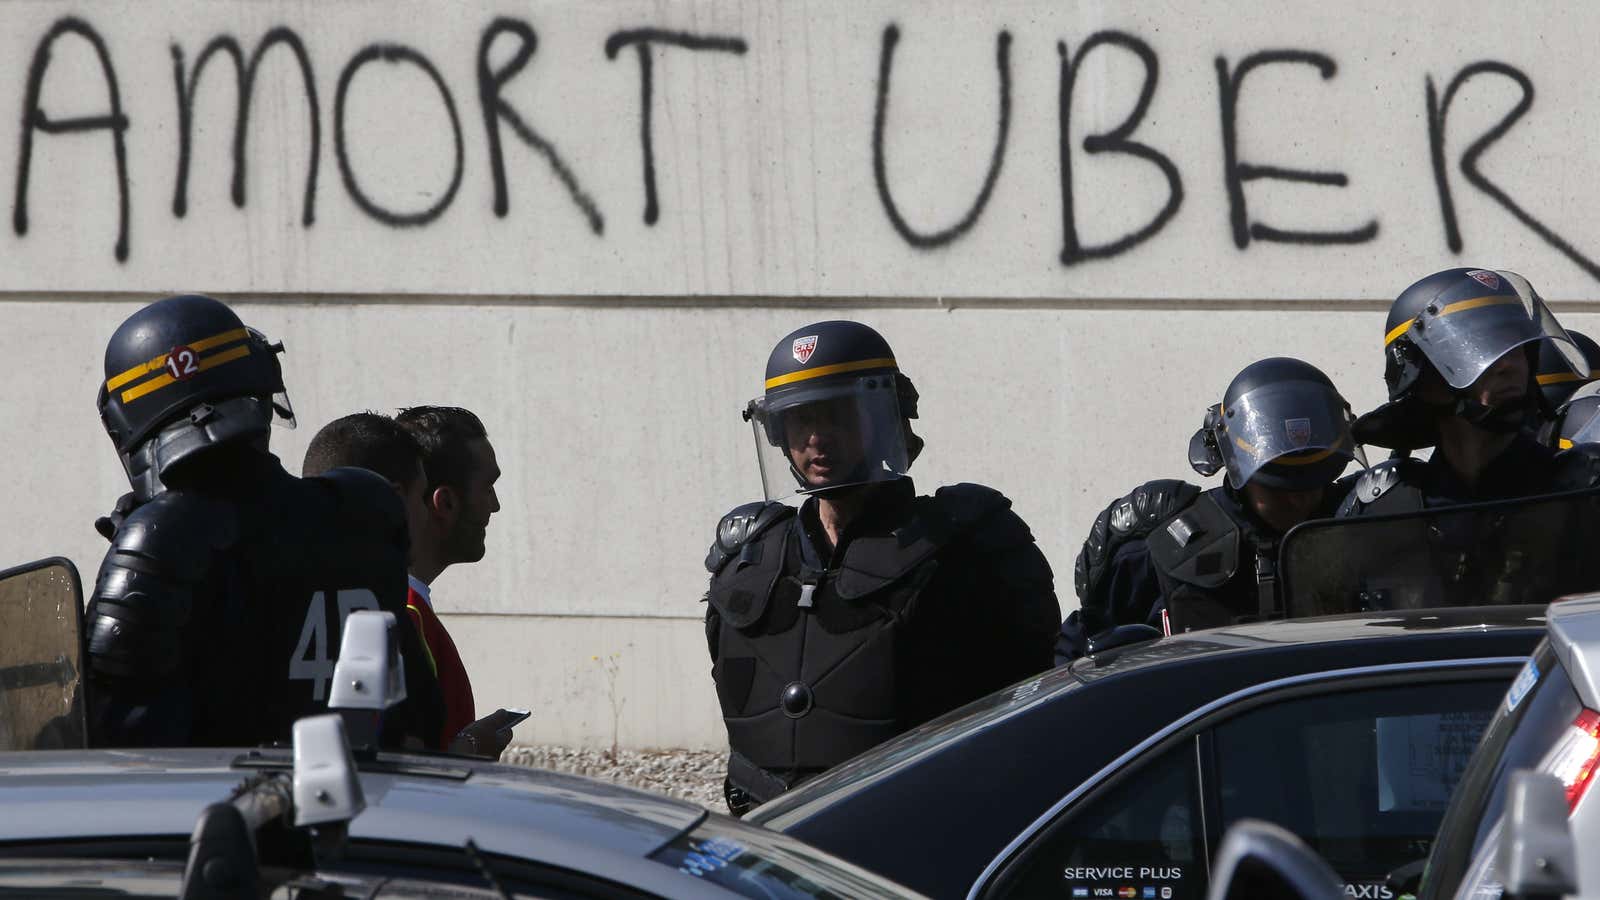 “Death to Uber”